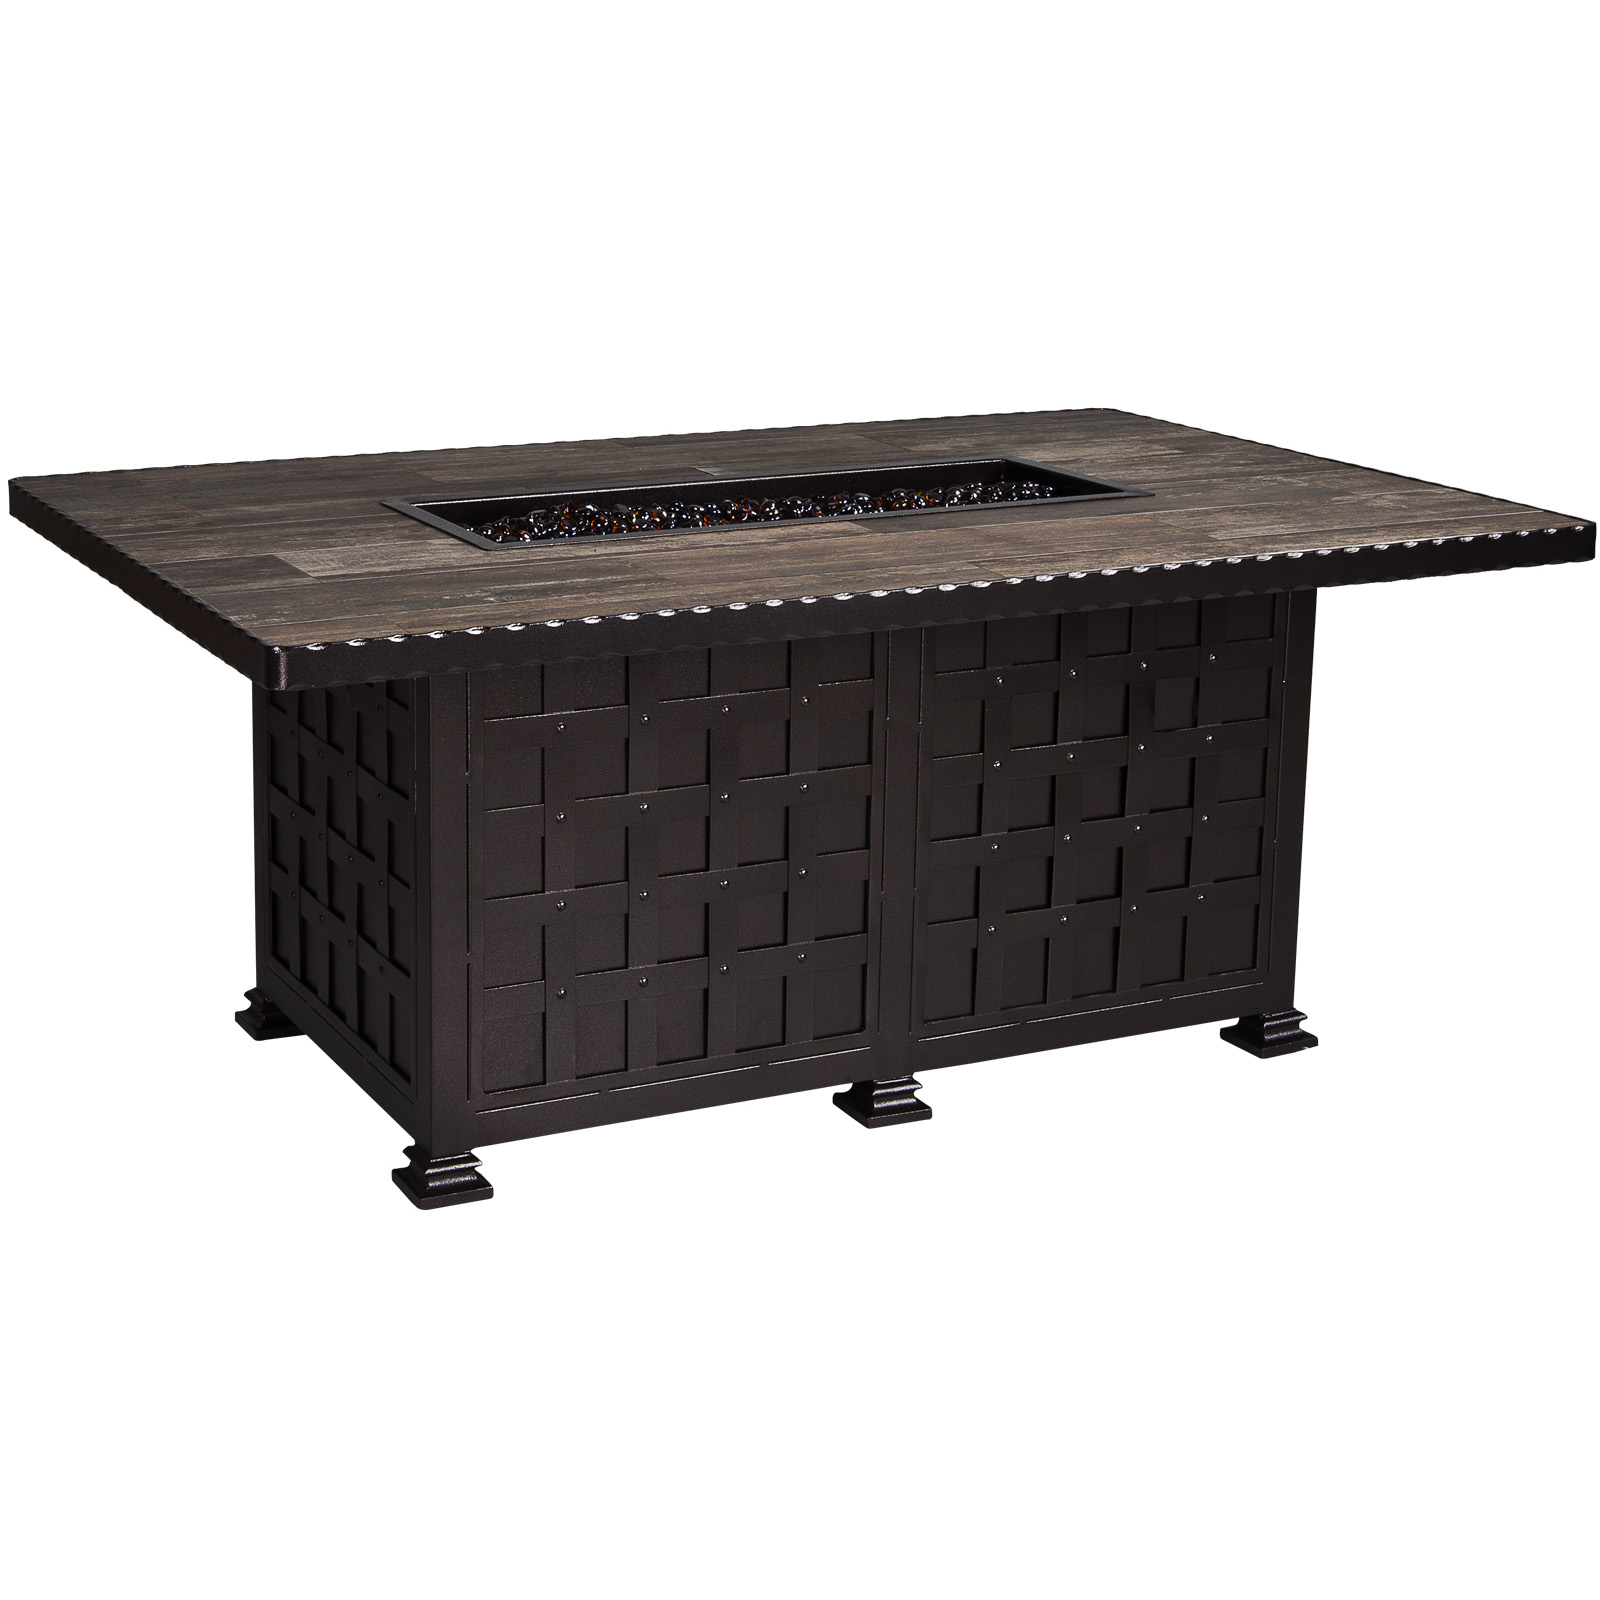 OW Lee Classico 36 inch by 58 inch Chat Height Fire Pit Table - 51-36C